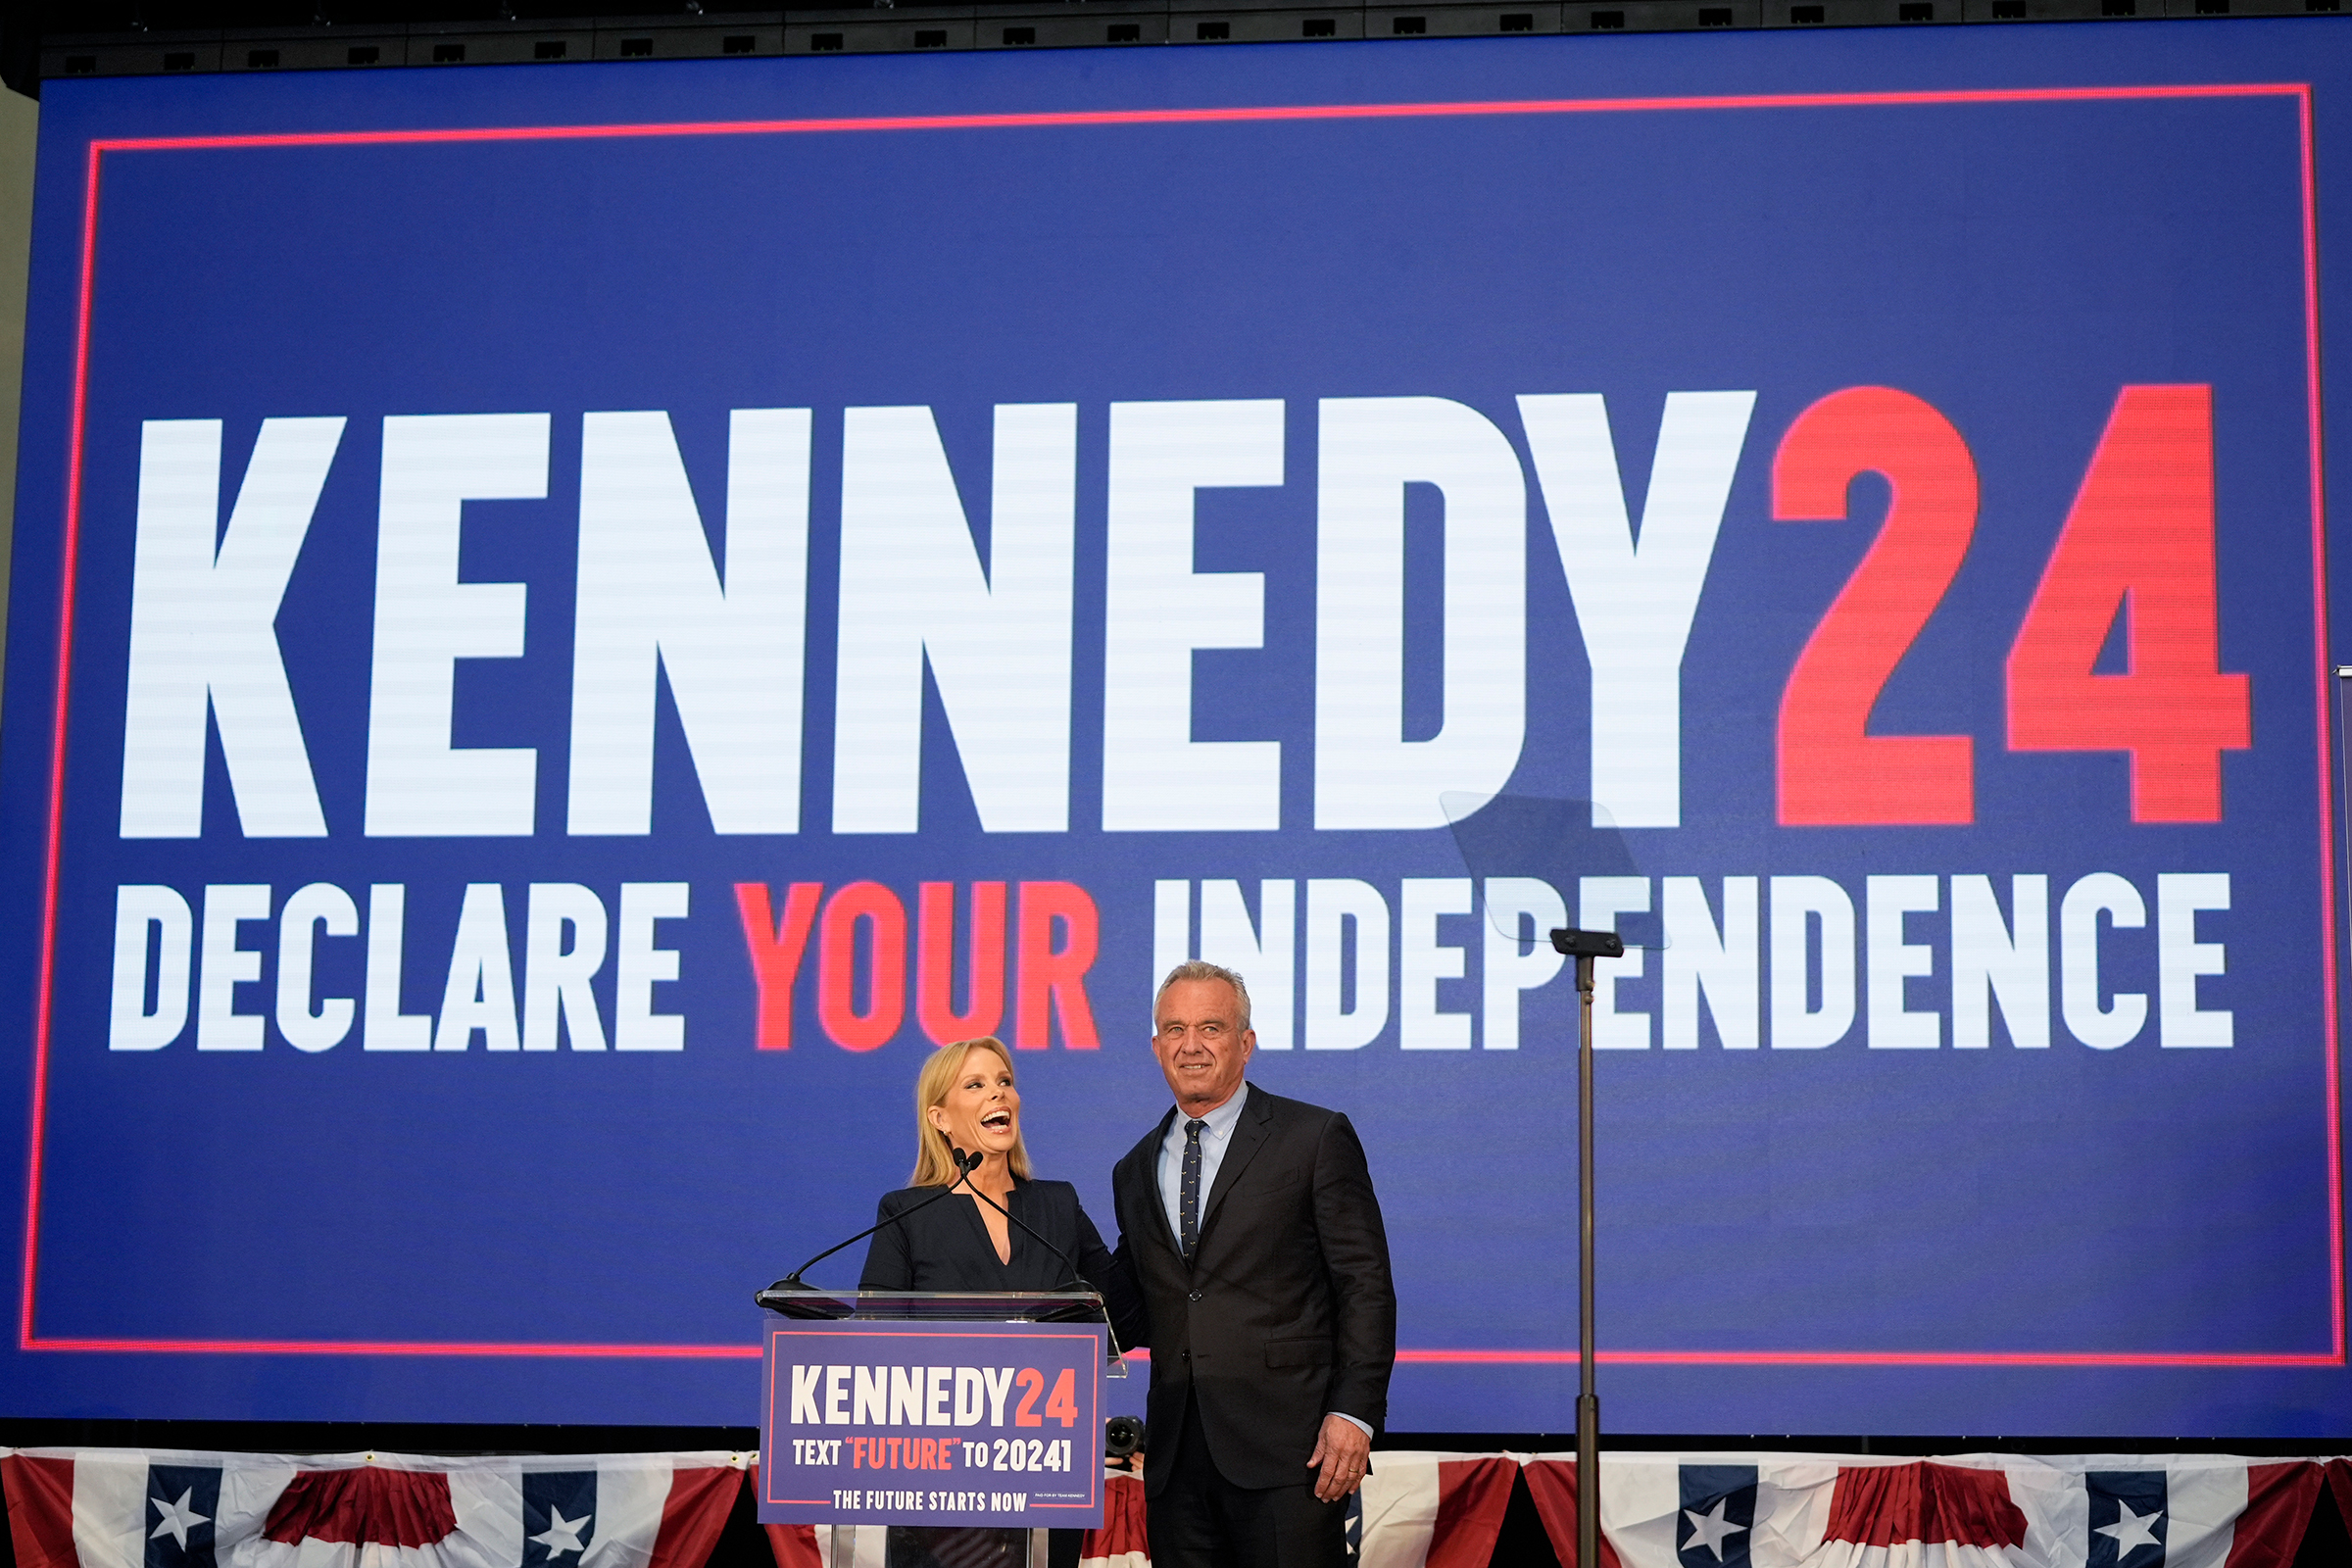 Presidential candidate Robert F. Kennedy Jr. right, is joined on the stage by his wife Cheryl Hines during a campaign event on Tuesday in Oakland, California.